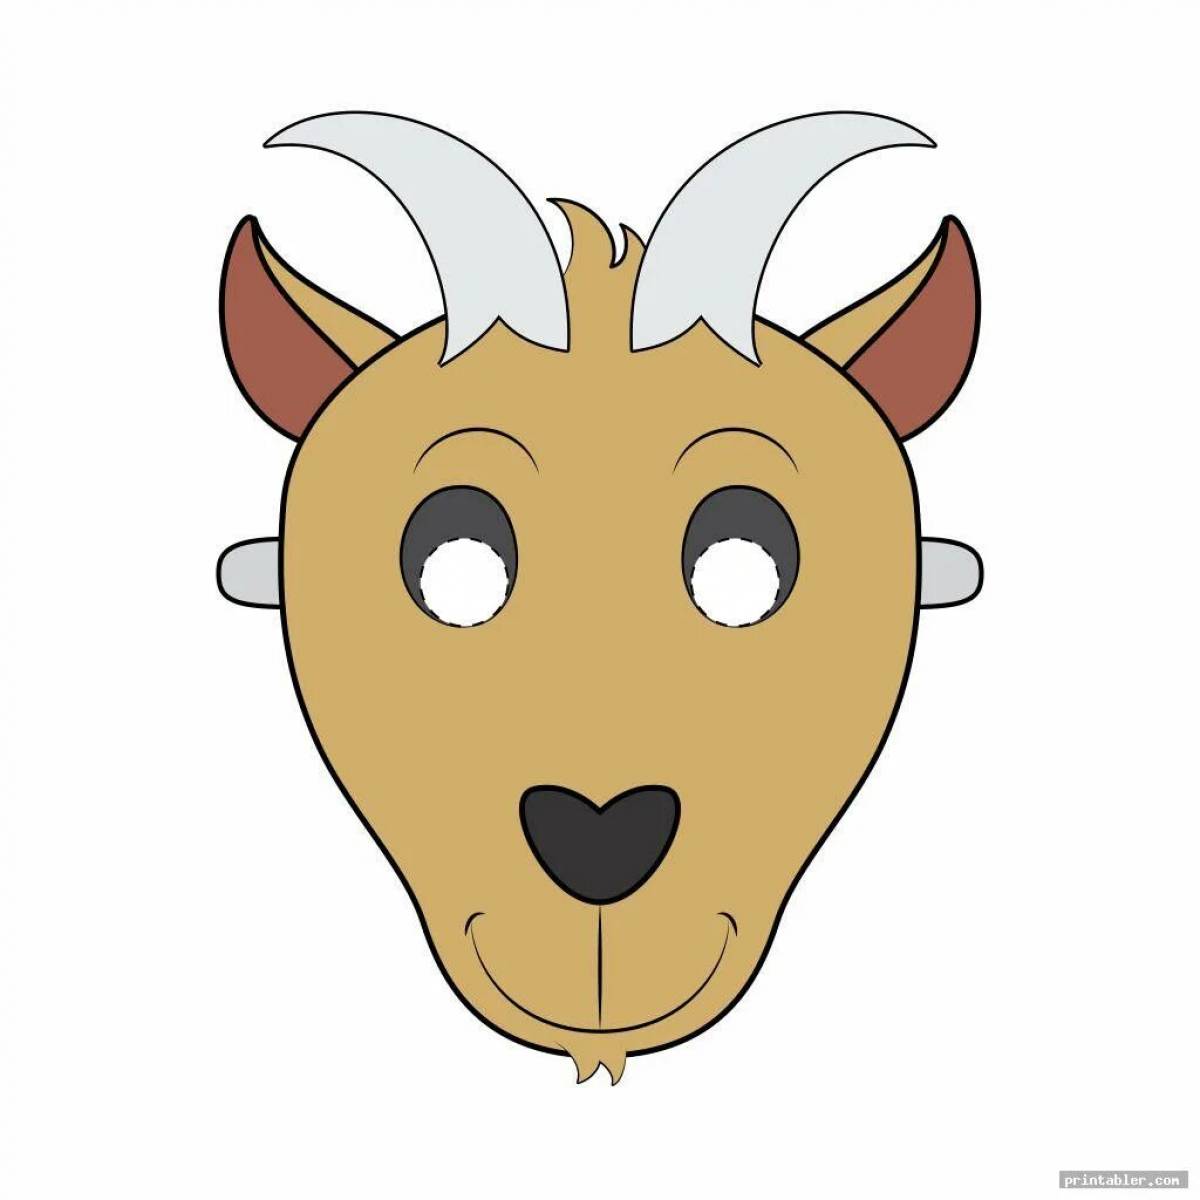 Exciting goat mask coloring page